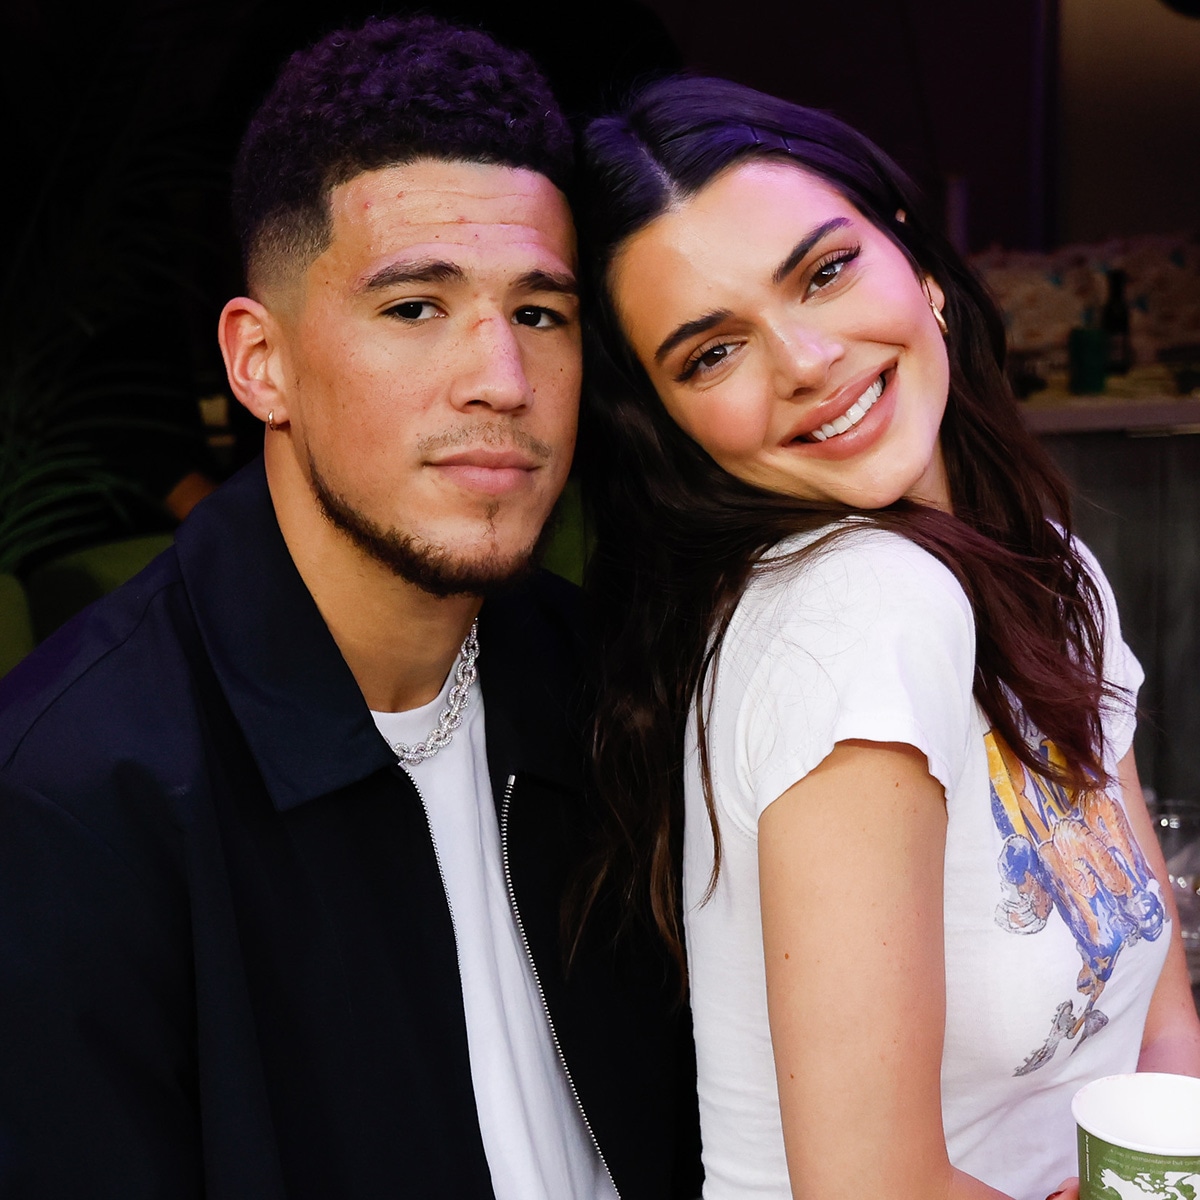 Kendall Jenner and Devin Booker discreetly called it quits in late November